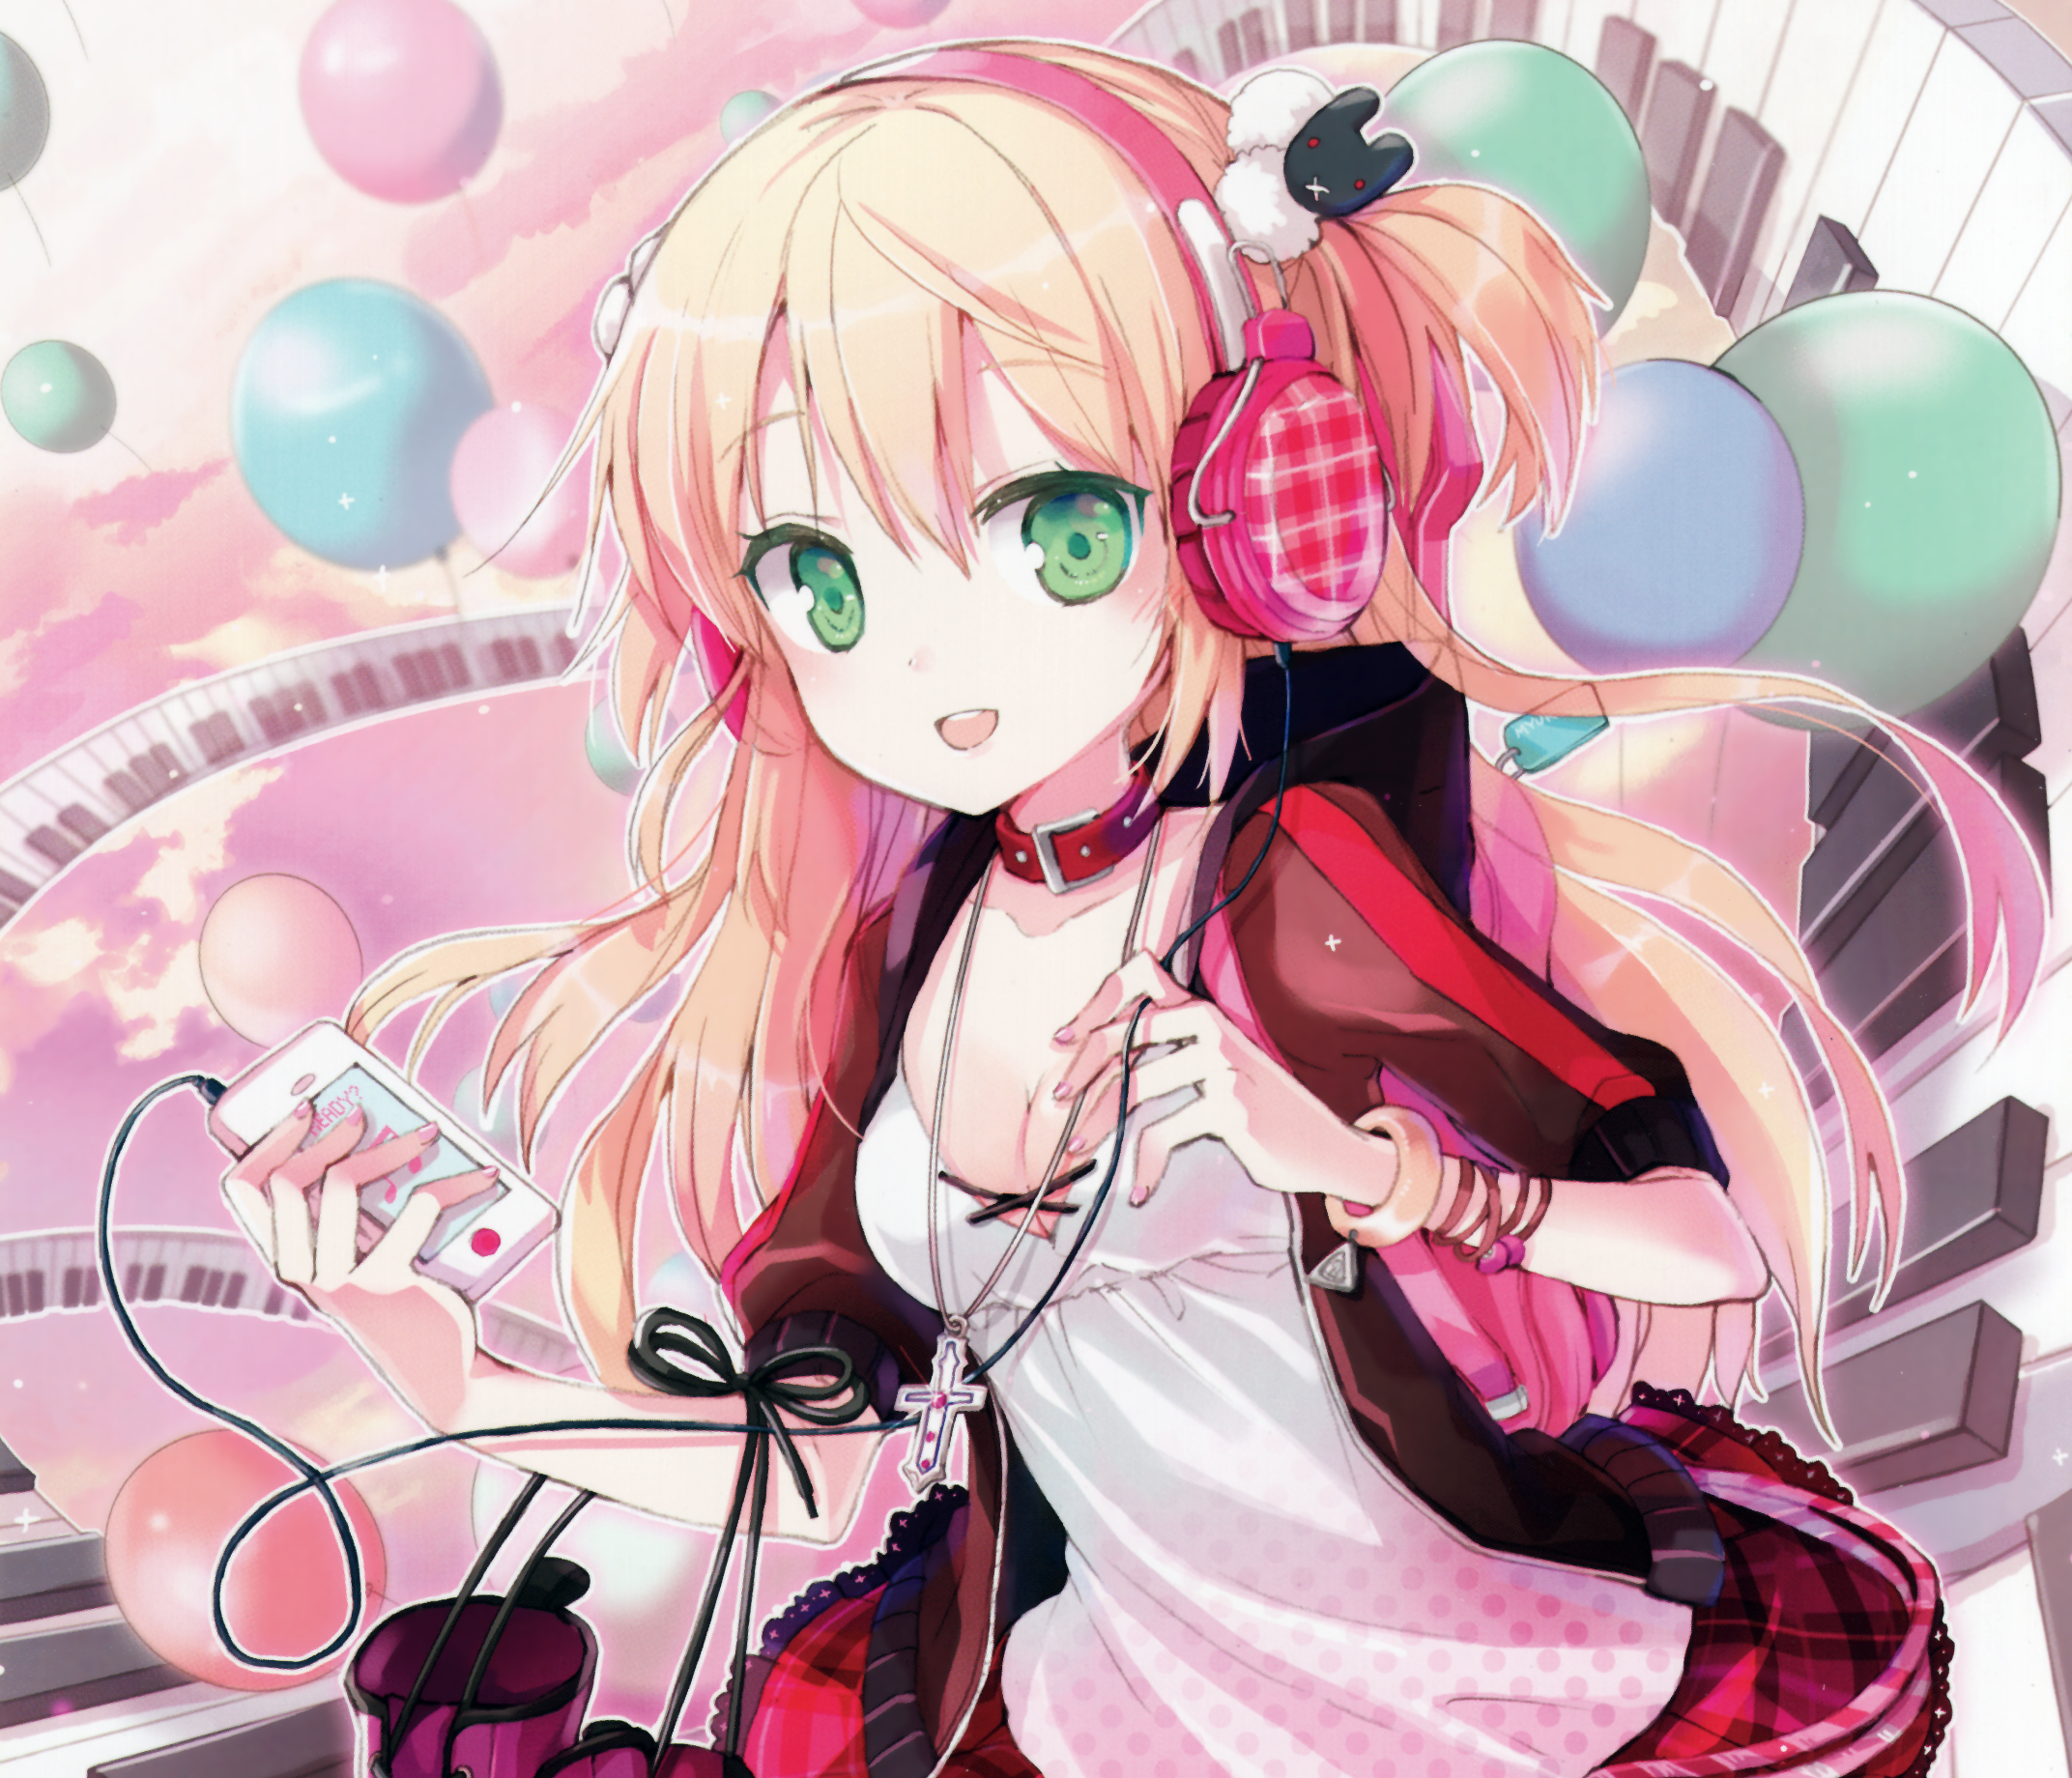 Bag Balloon Blonde Cross Green Eyes Headphones Long Hair Necklace Smile Twintails 2144x1840